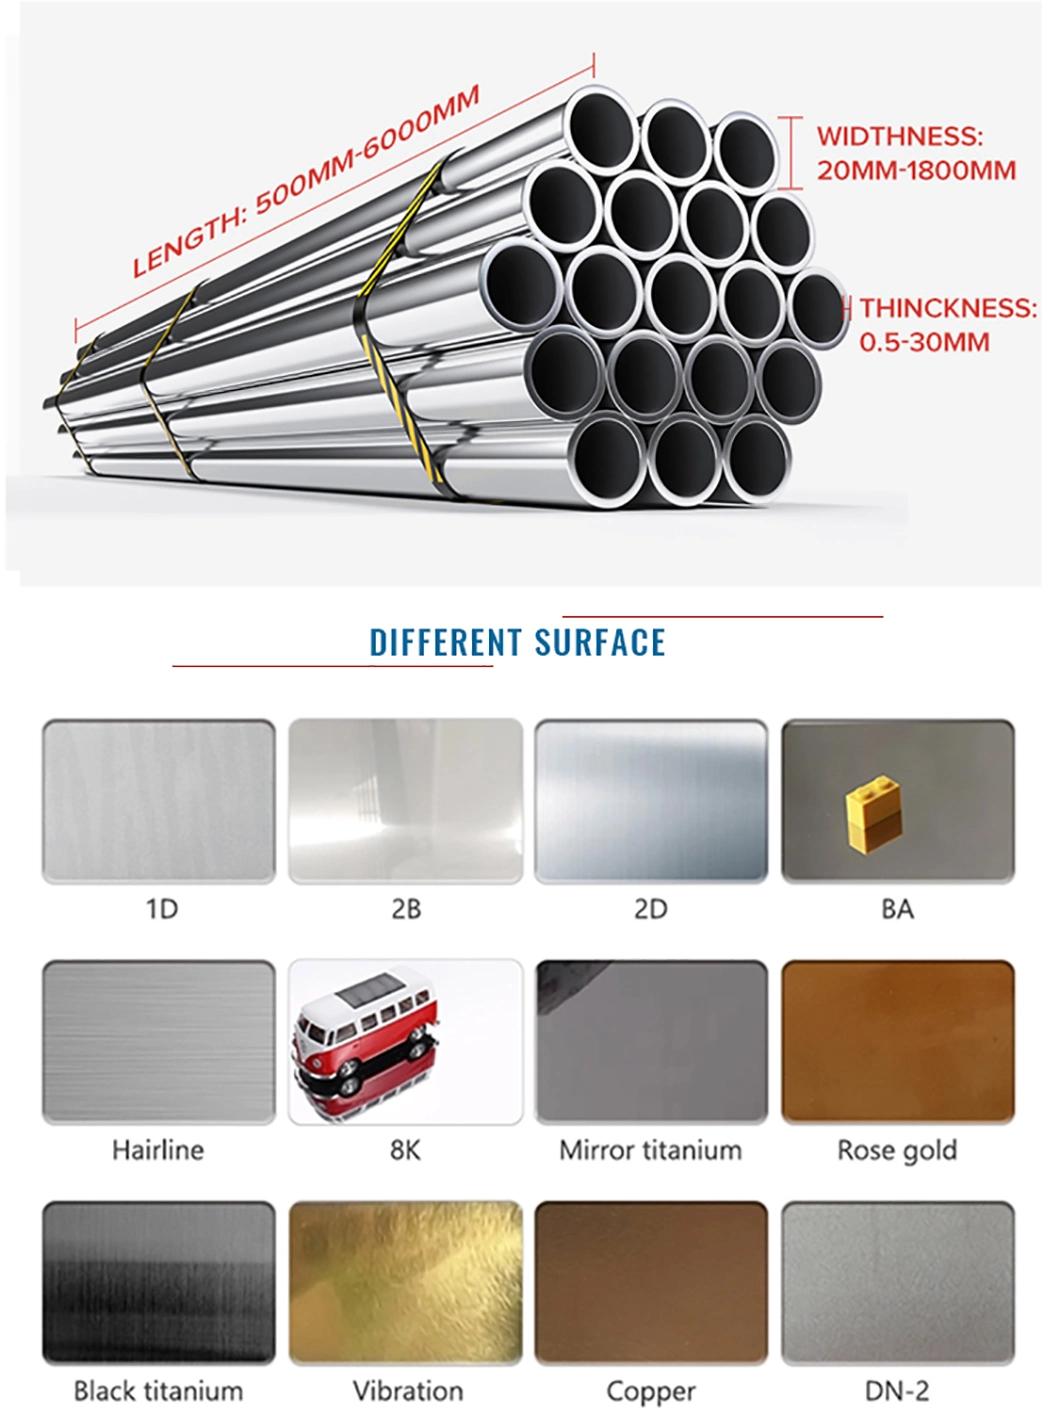 201 202 Stainless Steel Pipe